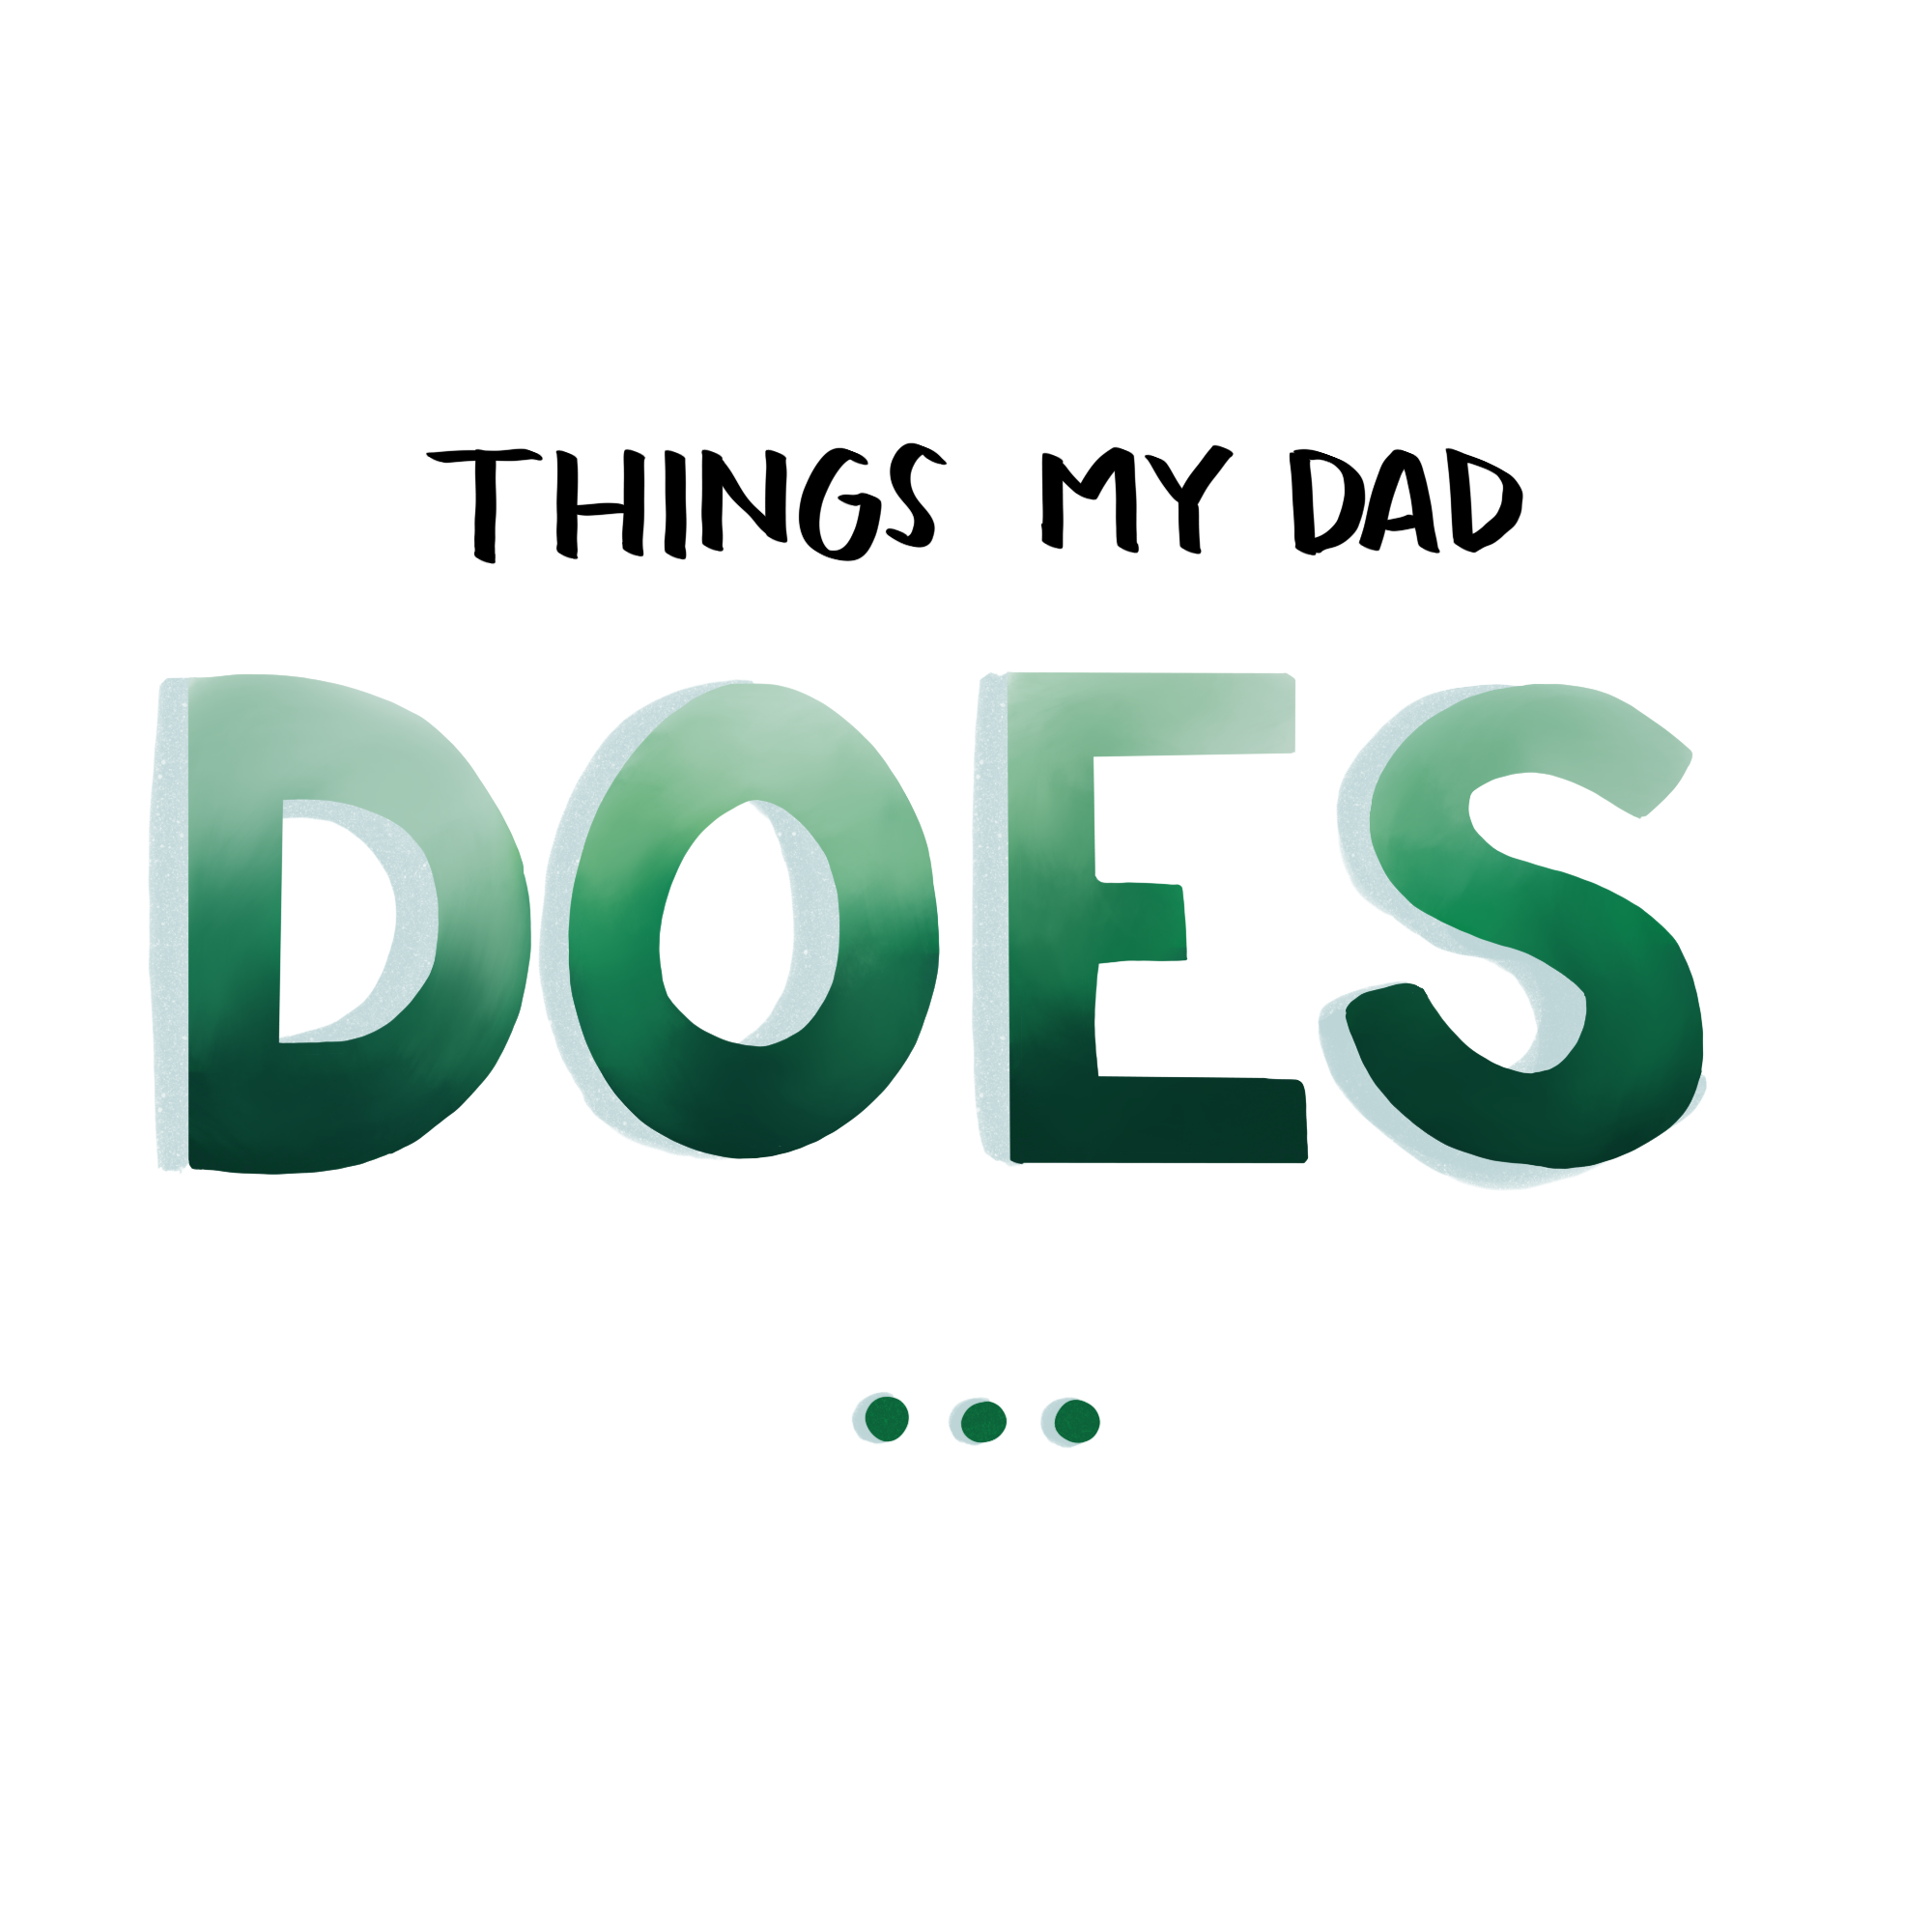 12 things my dad does.png